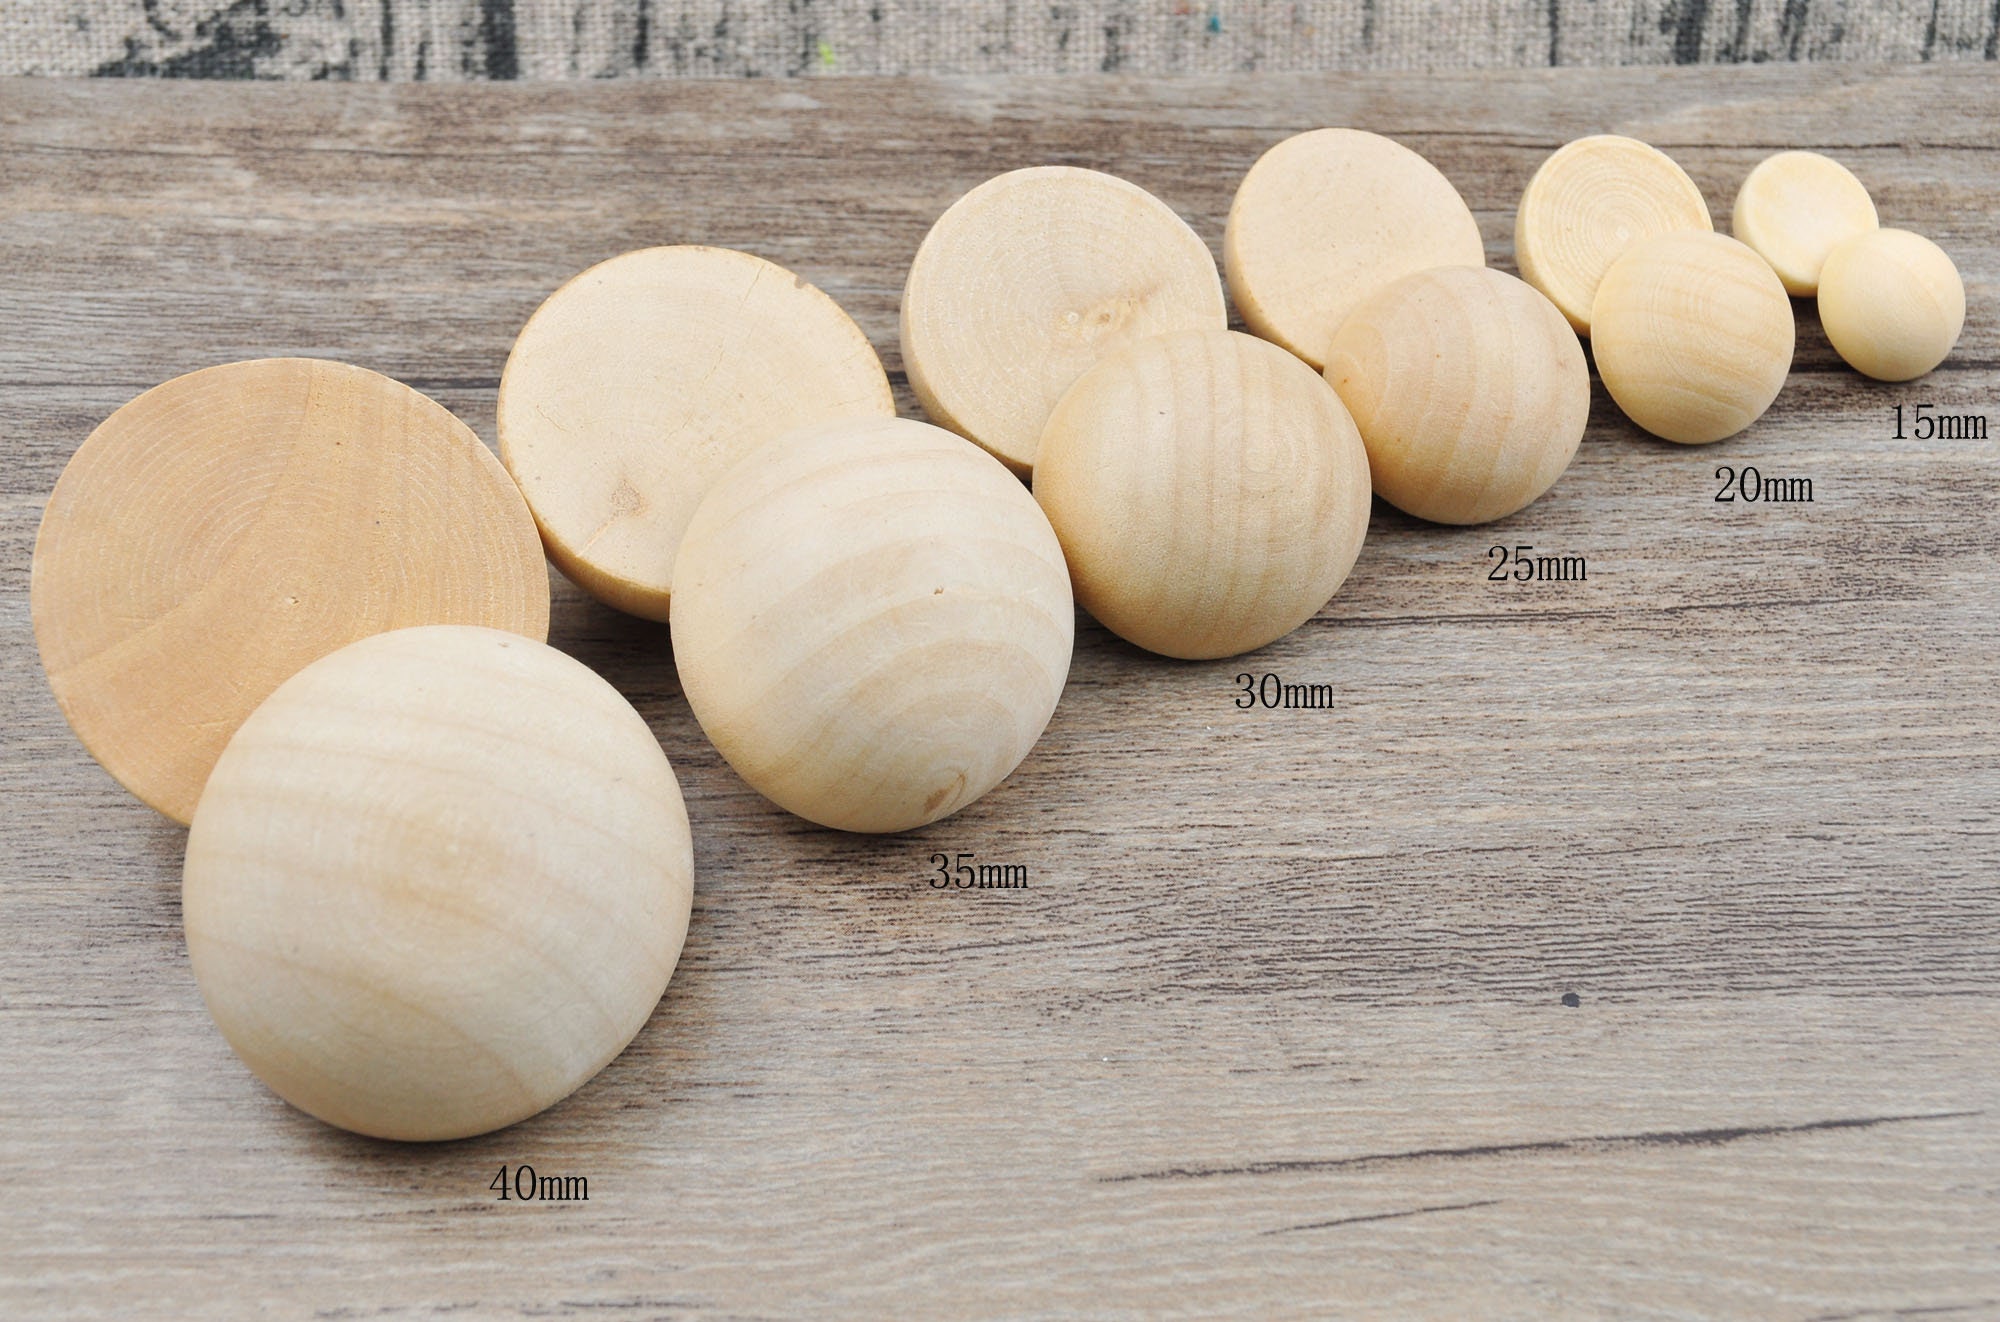 Half Round Unfinished Wooden Balls Smooth Split Wood Ball Beads for DIY  Crafts